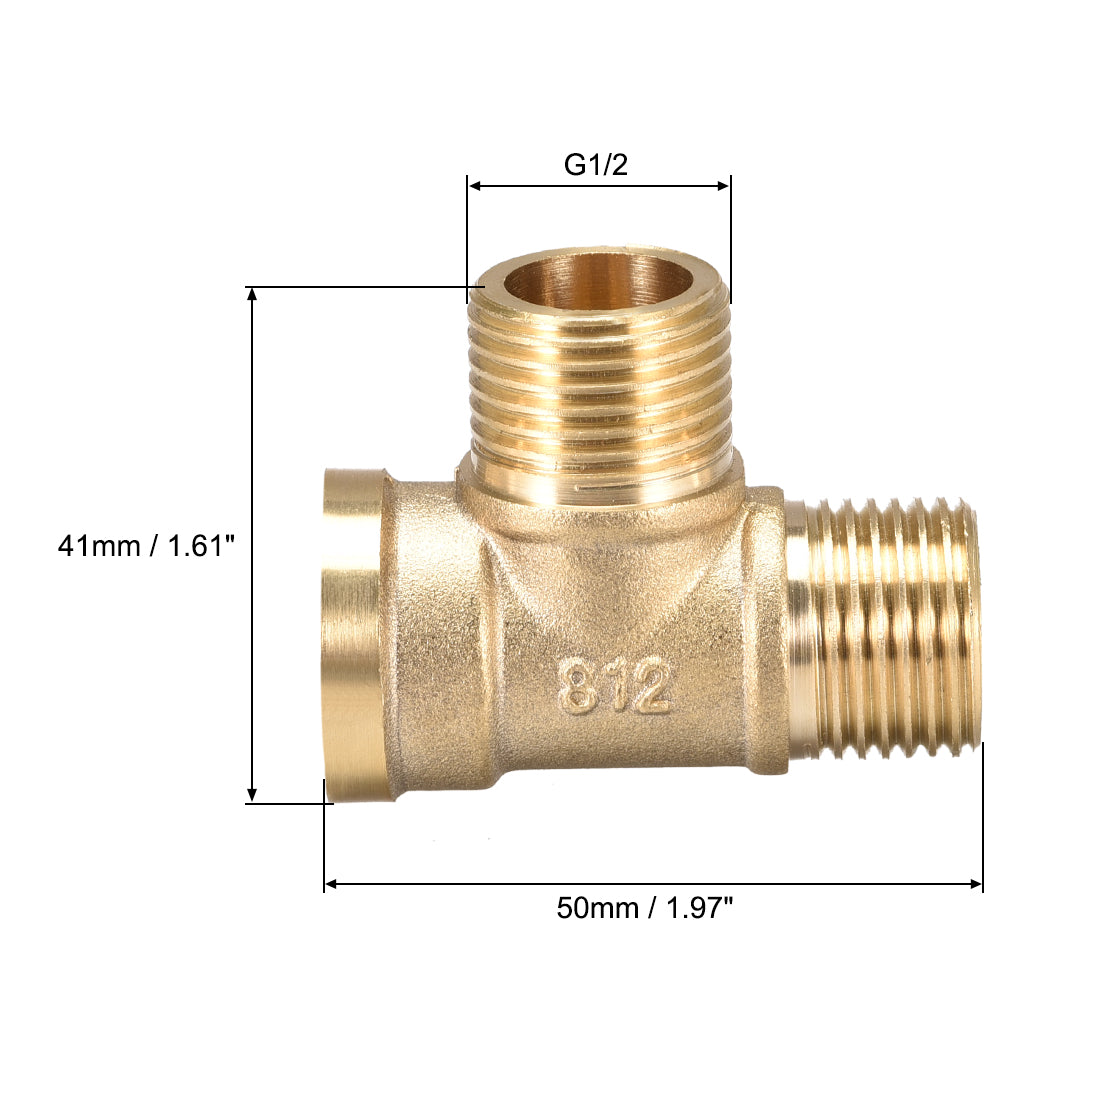 uxcell Uxcell Brass Tee Pipe Fitting G1/2 Male x G1/2 Male  x G1/2 Female T Shaped Connector Coupler